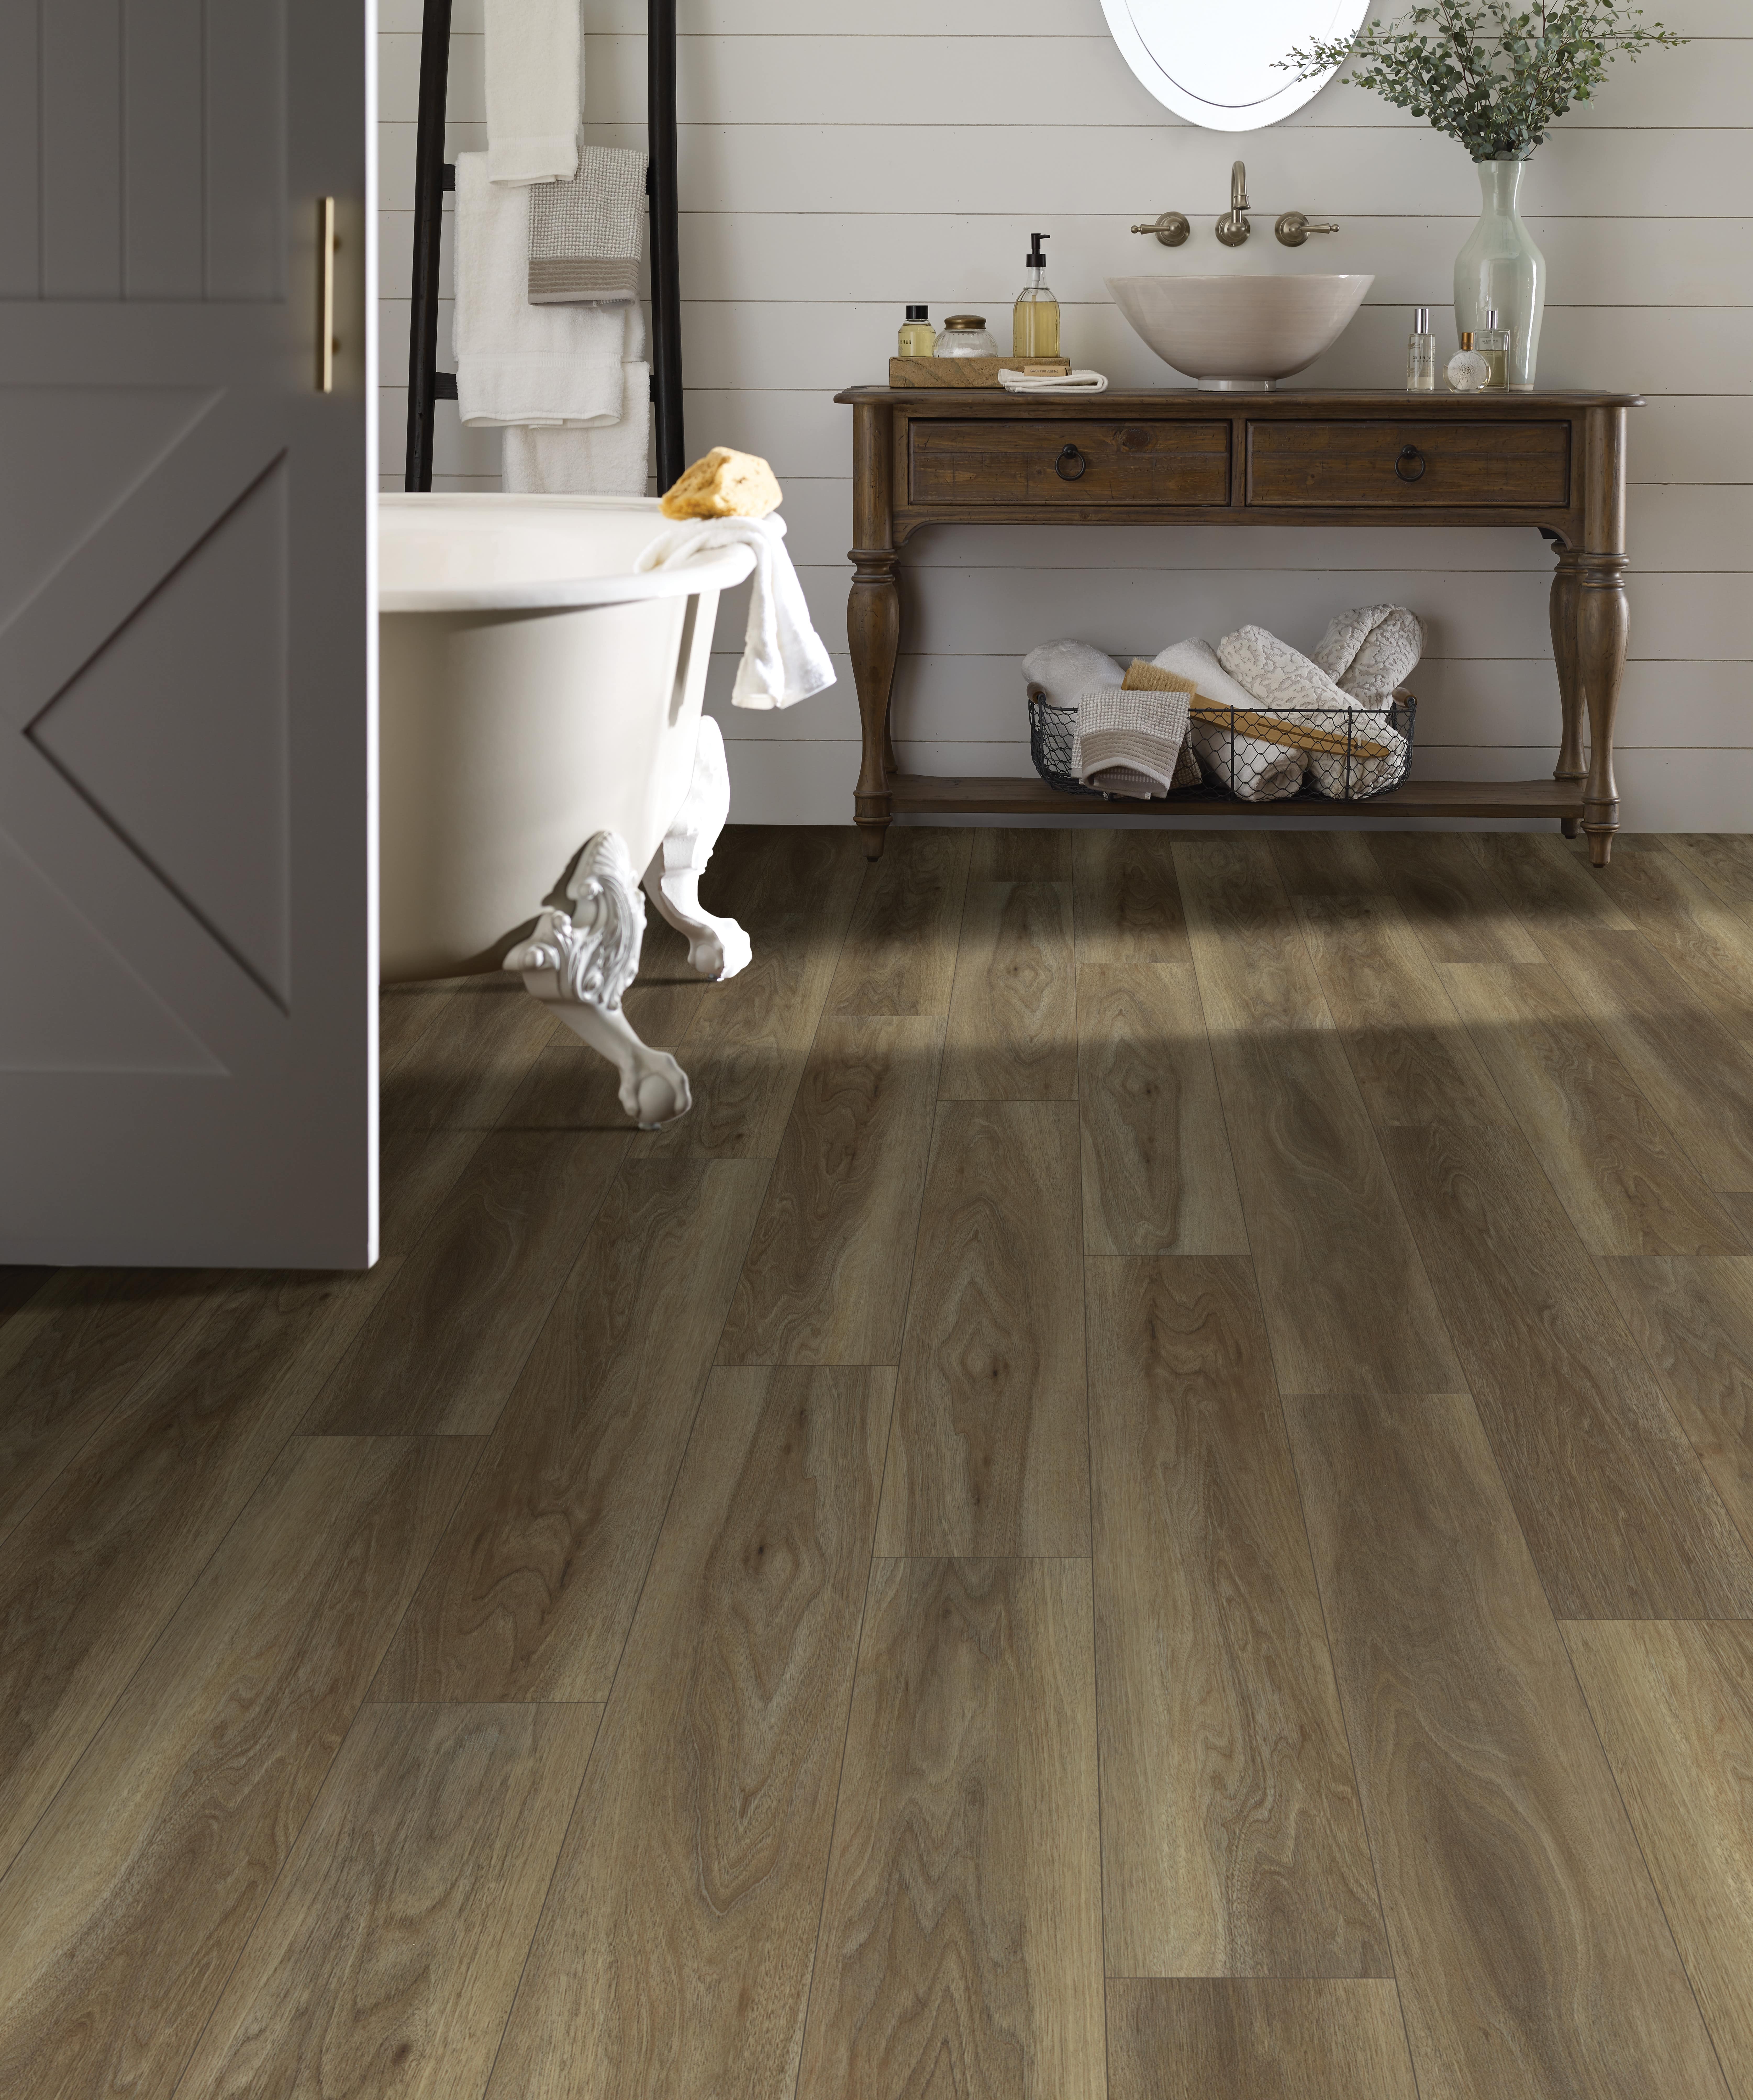 Wood Floor Bathrooms How To Do Them, How To Lay Laminate Flooring In A Small Bathroom